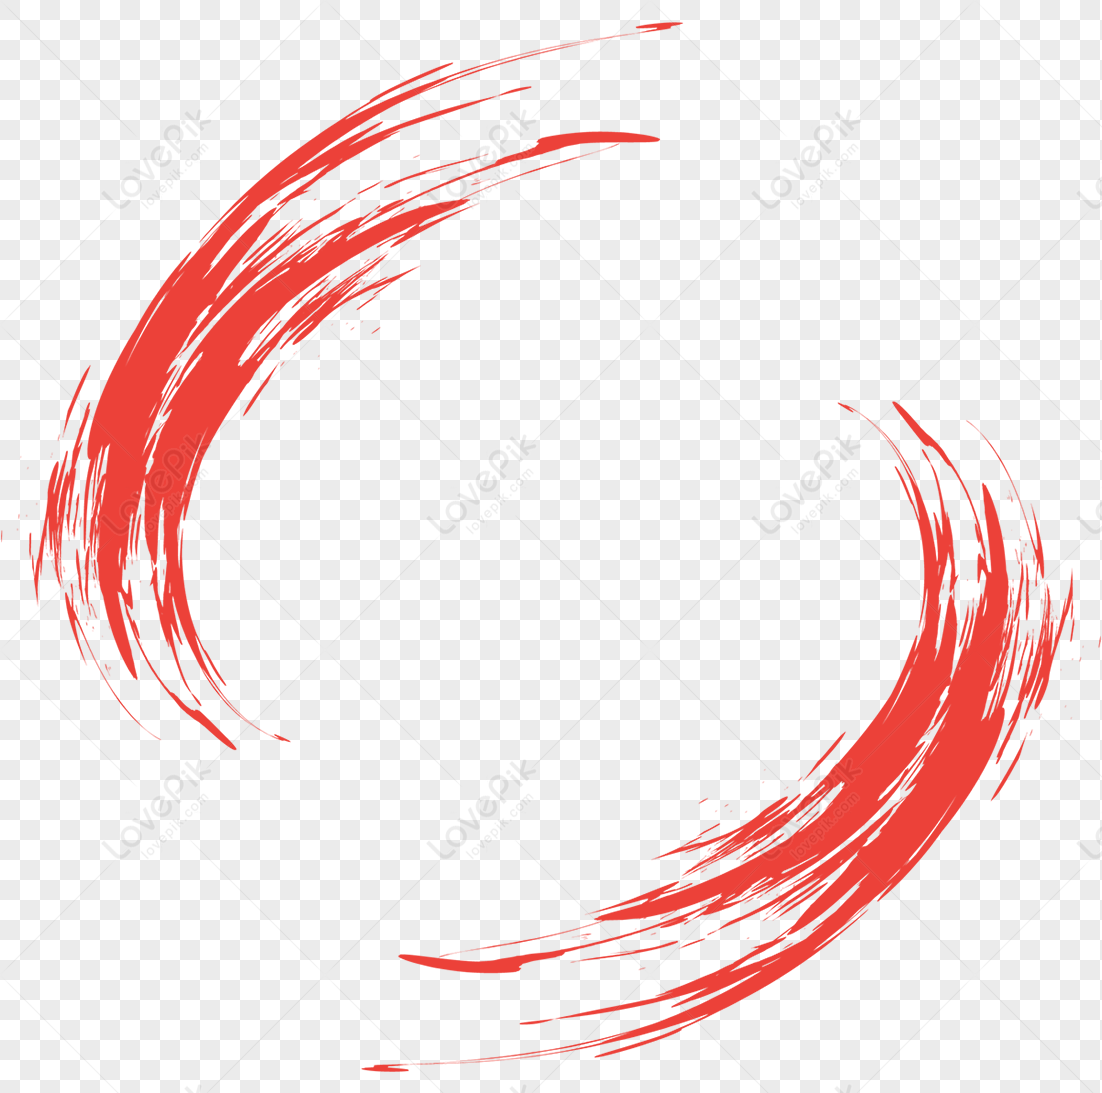 Circle PNG Images, Download 480000+ Circle PNG Resources with